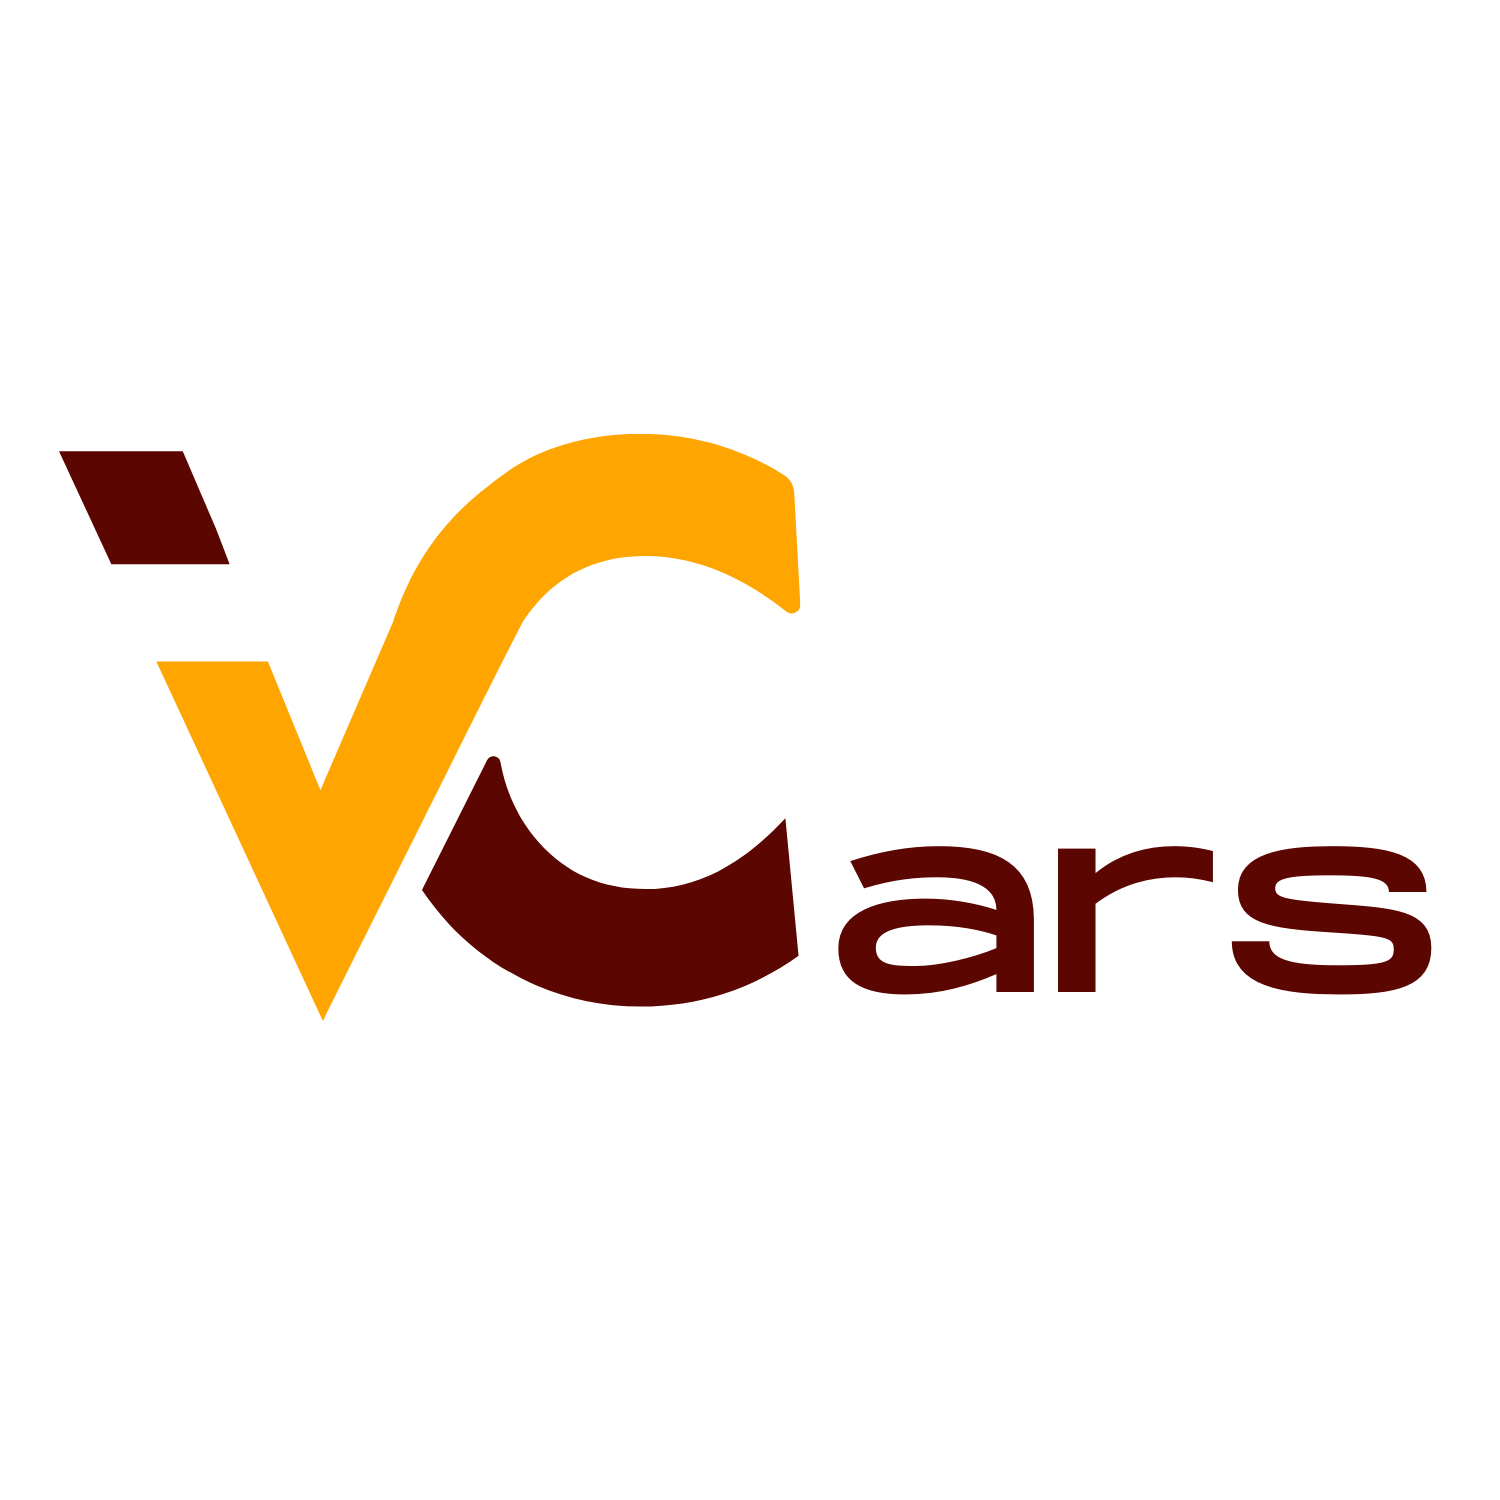 V Cars – Happiness driven